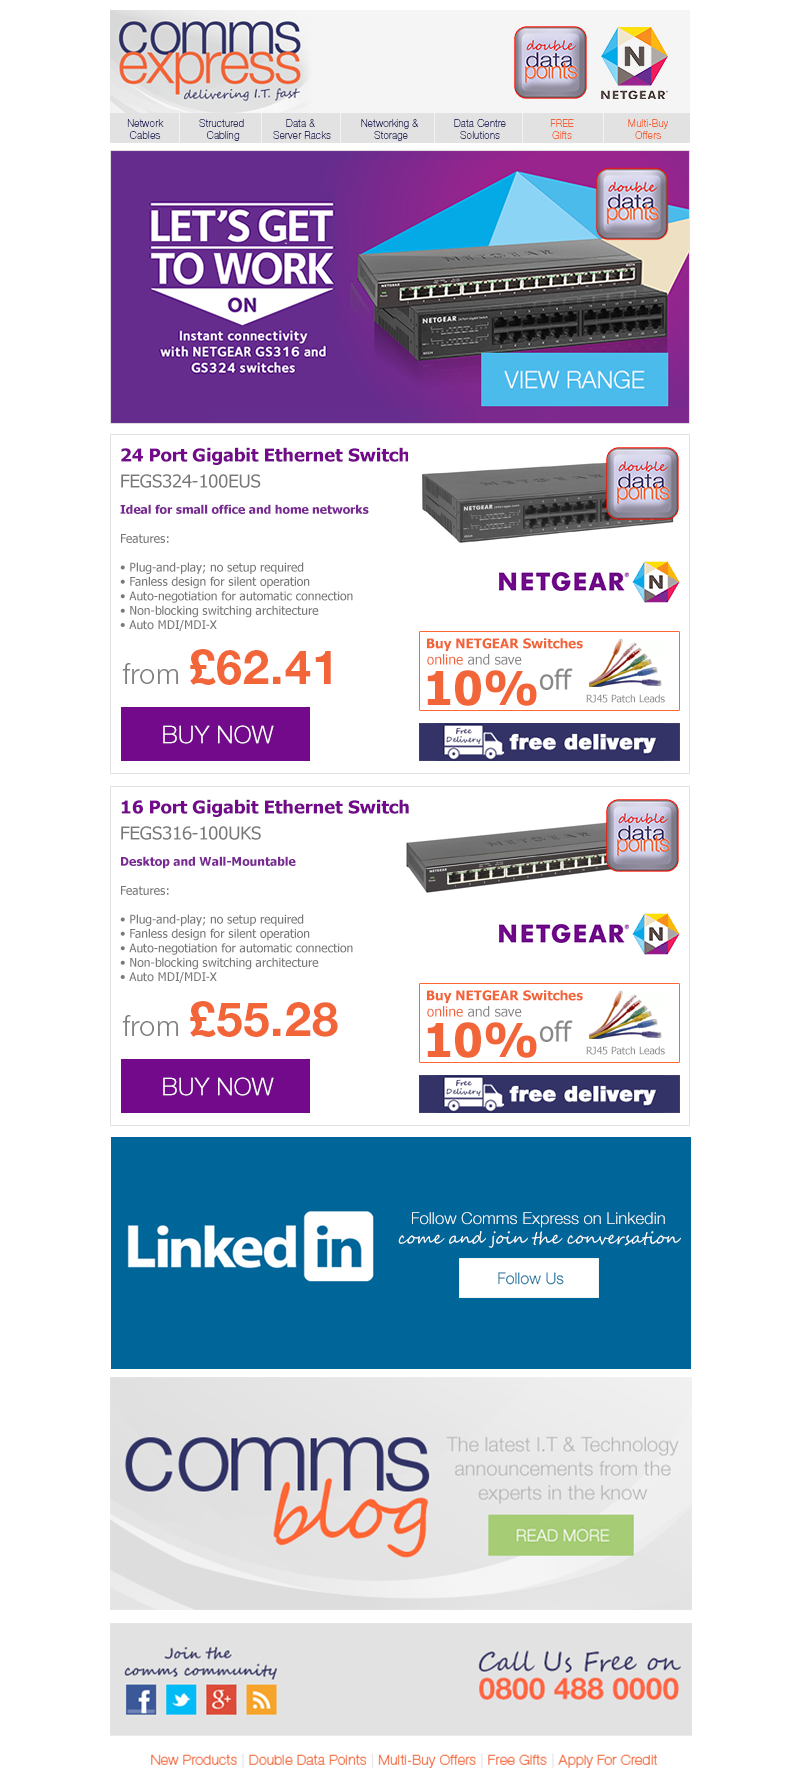 Lets get to work on Netgear ProSafe X Series now with D